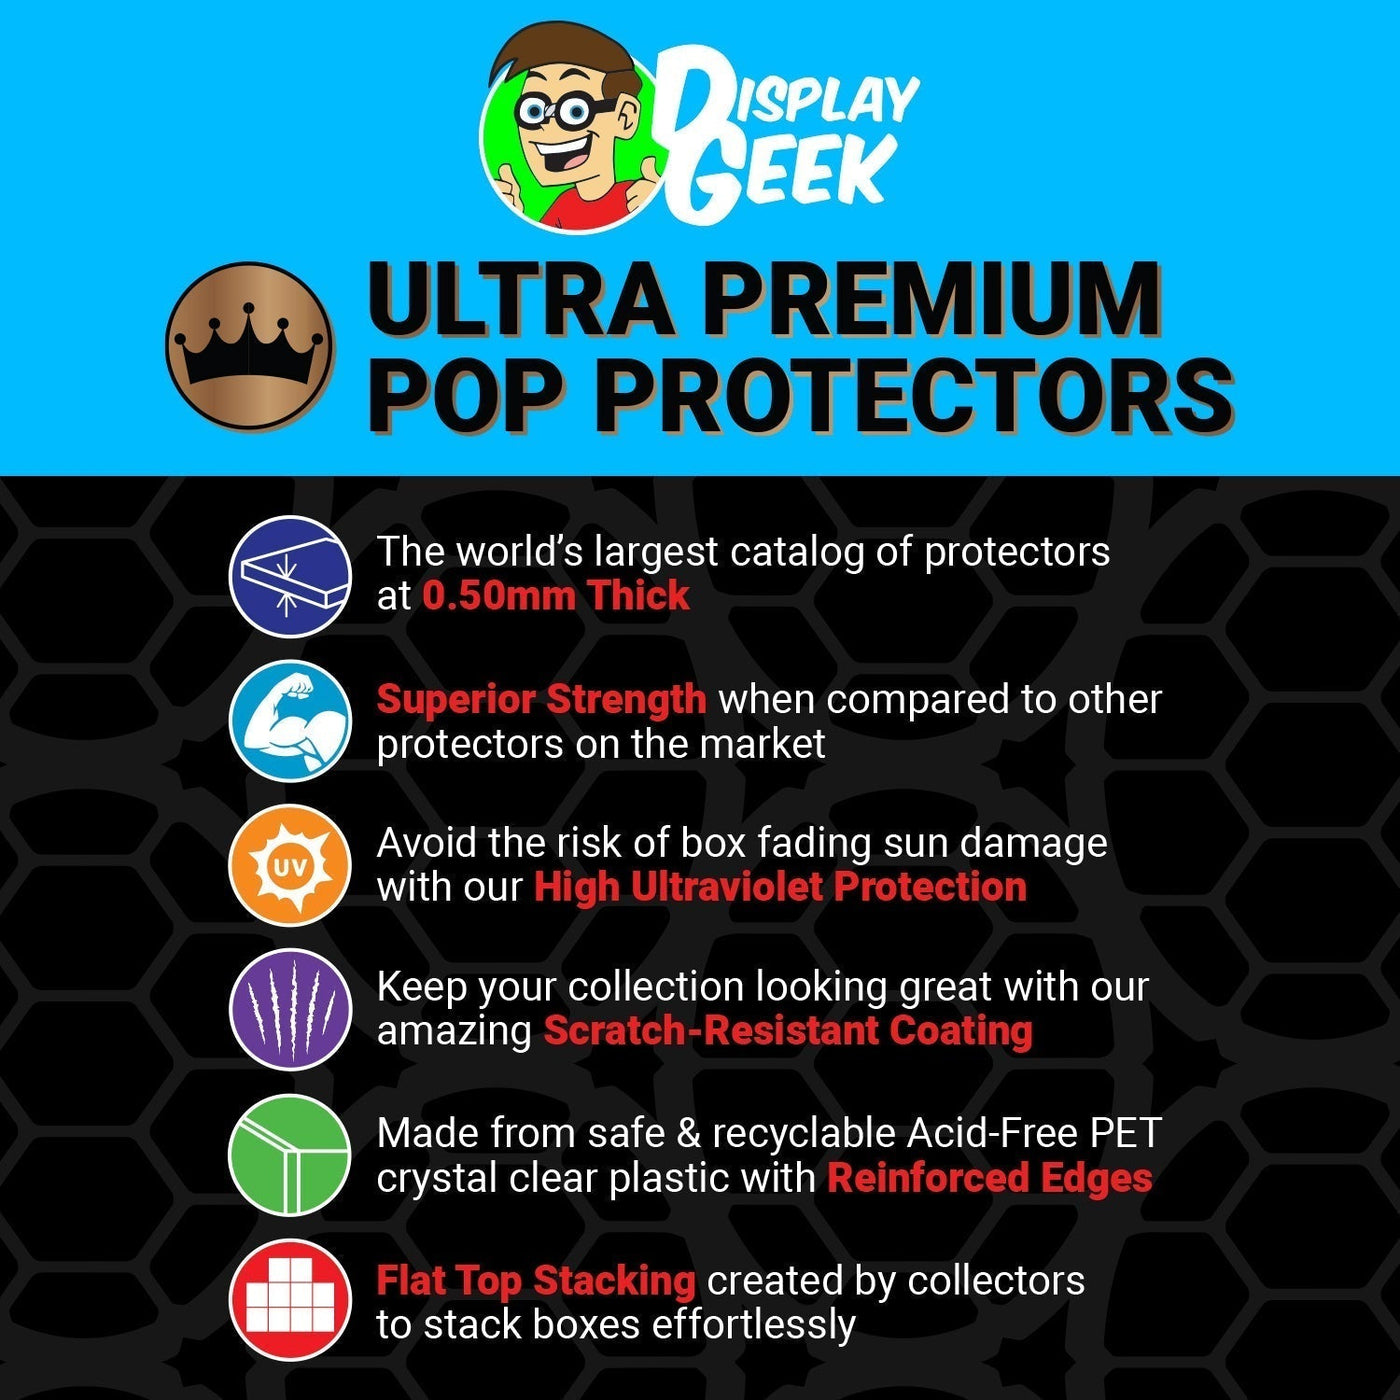 Pop Protector for 6 inch Mag the Mighty SDCC #48 Super Funko Pop on The Protector Guide App by Display Geek